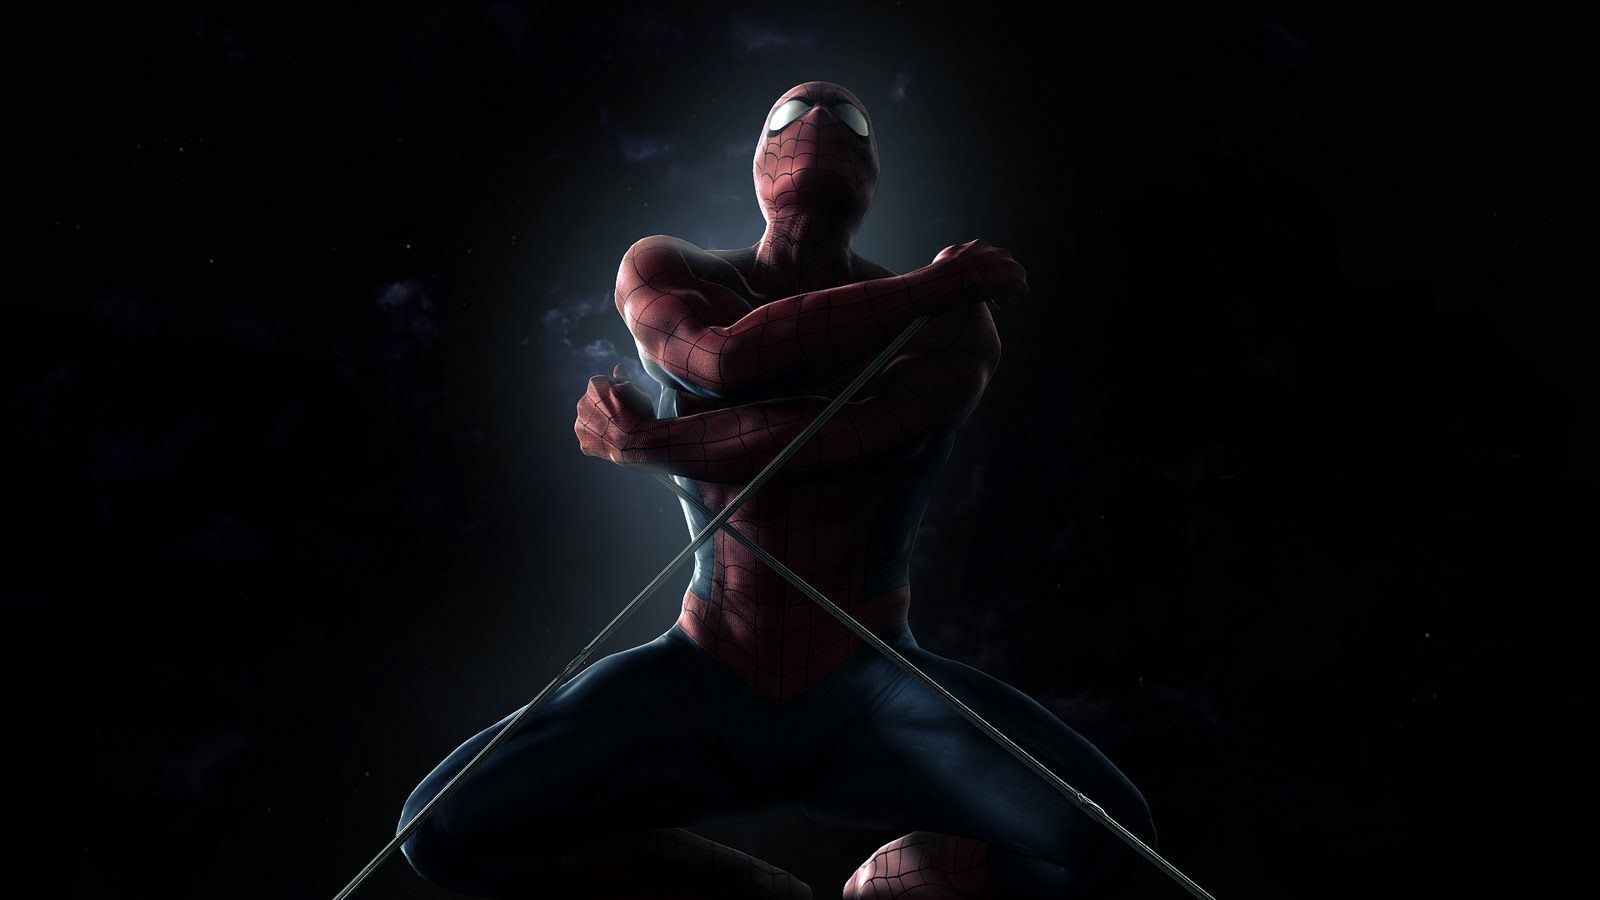 Spiderman 4 HD Wallpapers | Spiderman 4 Images | Cool Wallpapers